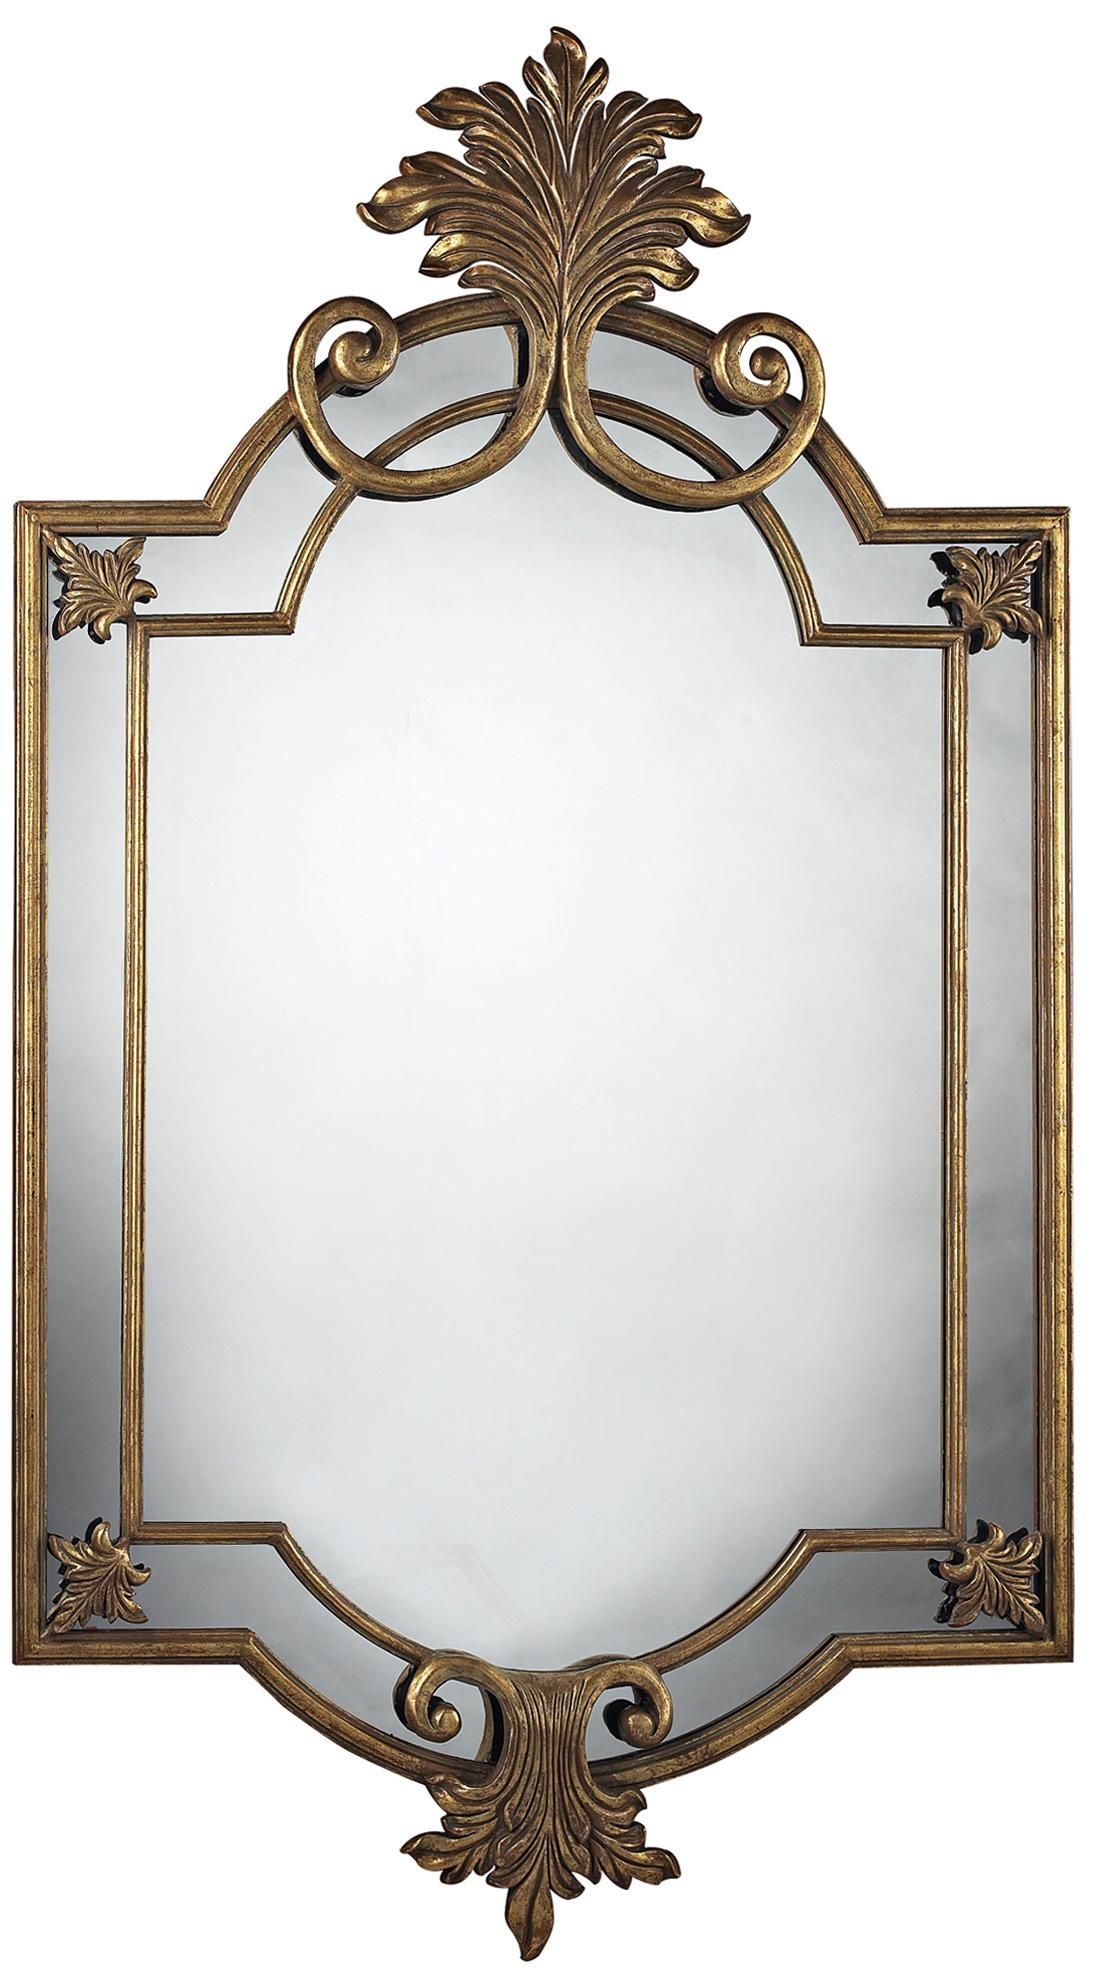 Gretna 60" High Gold Leaf Wall Mirror – #X7163 | Lamps Plus | Mirror Intended For High Wall Mirrors (View 5 of 15)